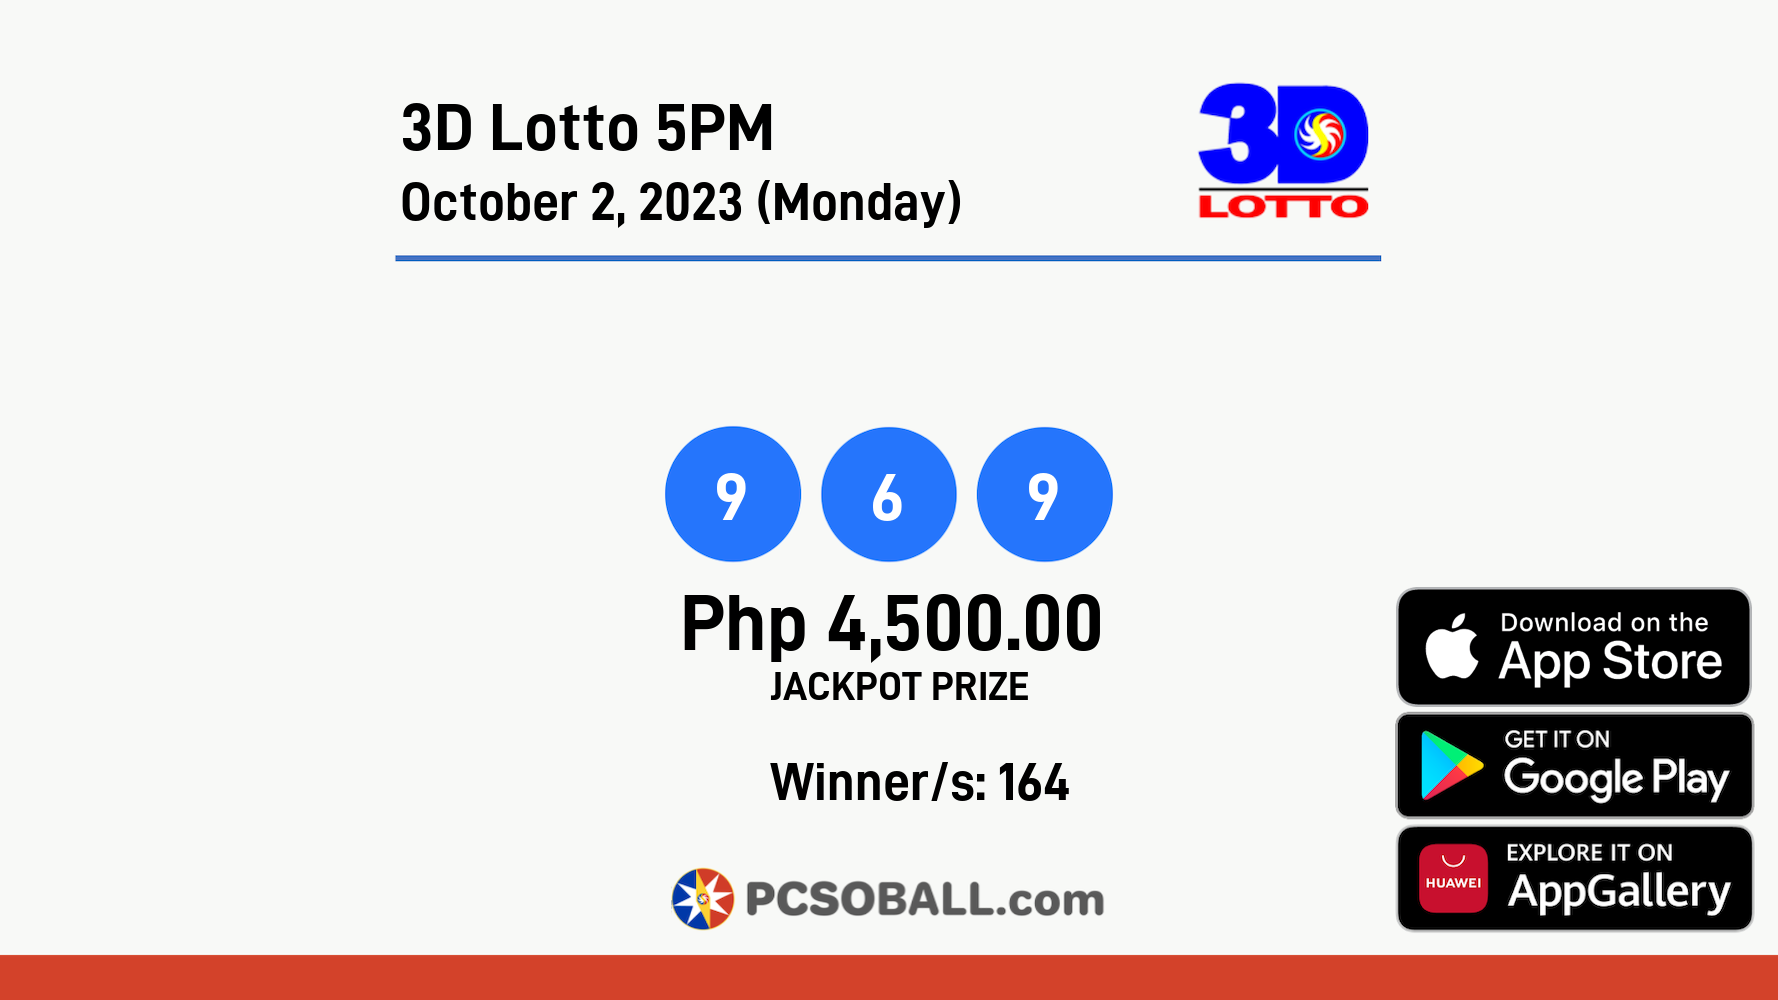 3D Lotto 5PM October 2, 2023 (Monday) Result